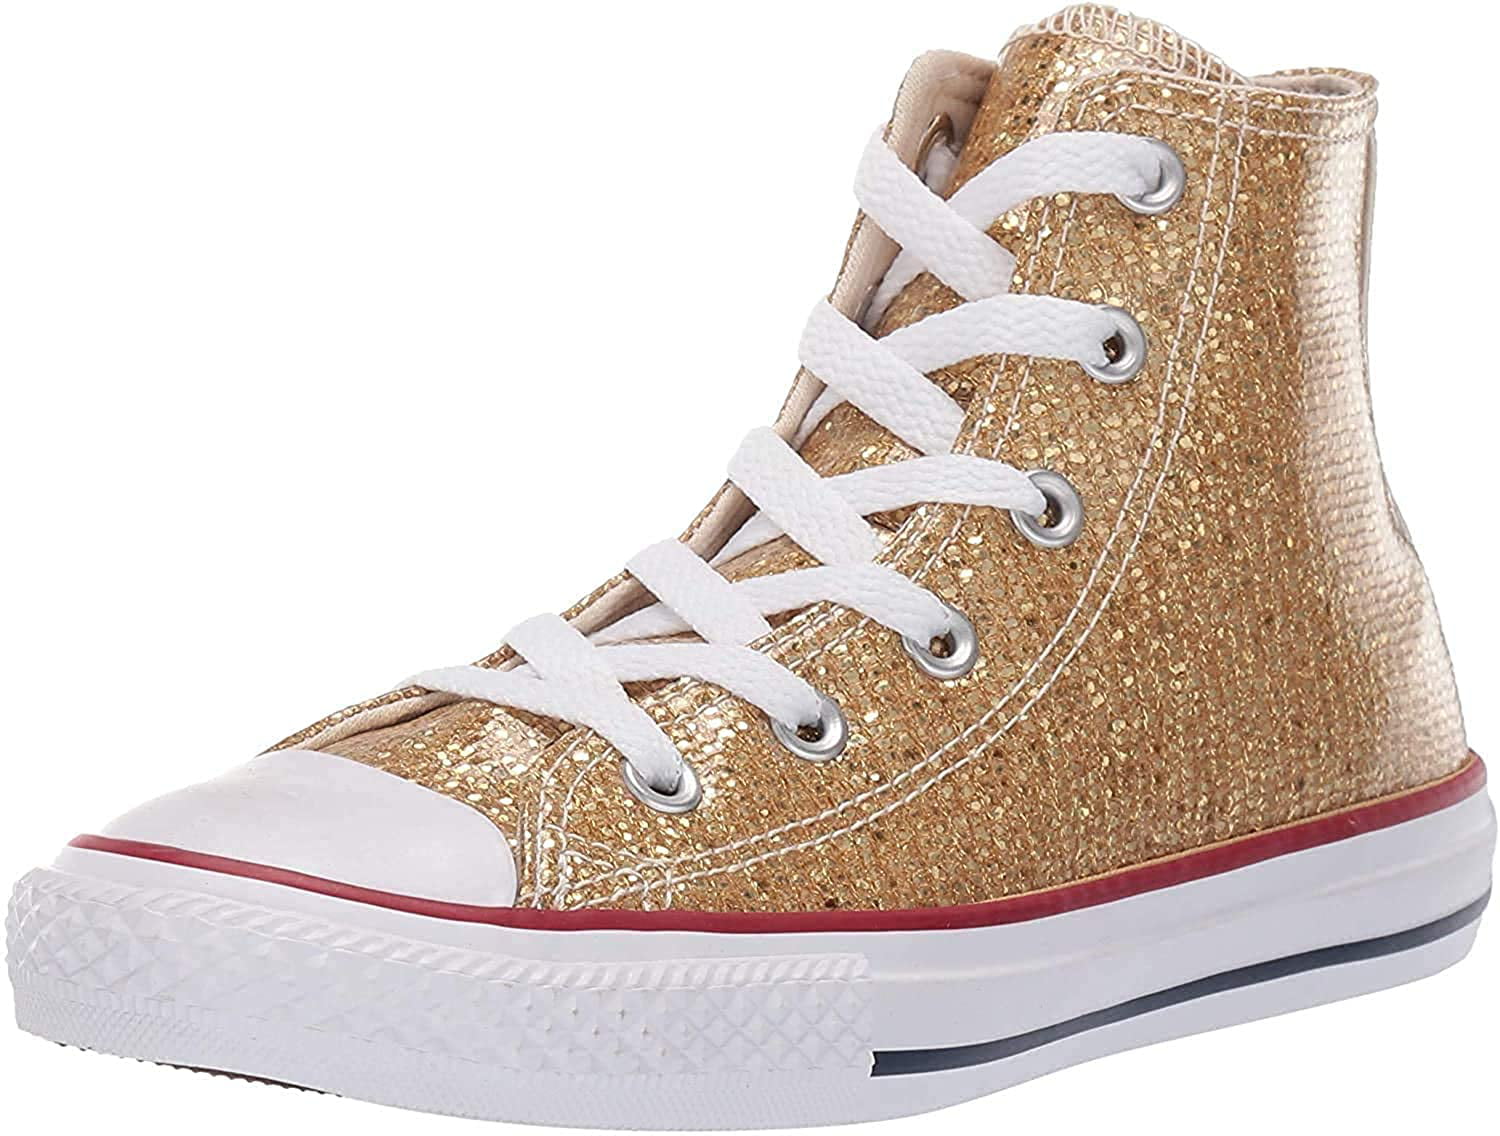 white and gold converse high tops